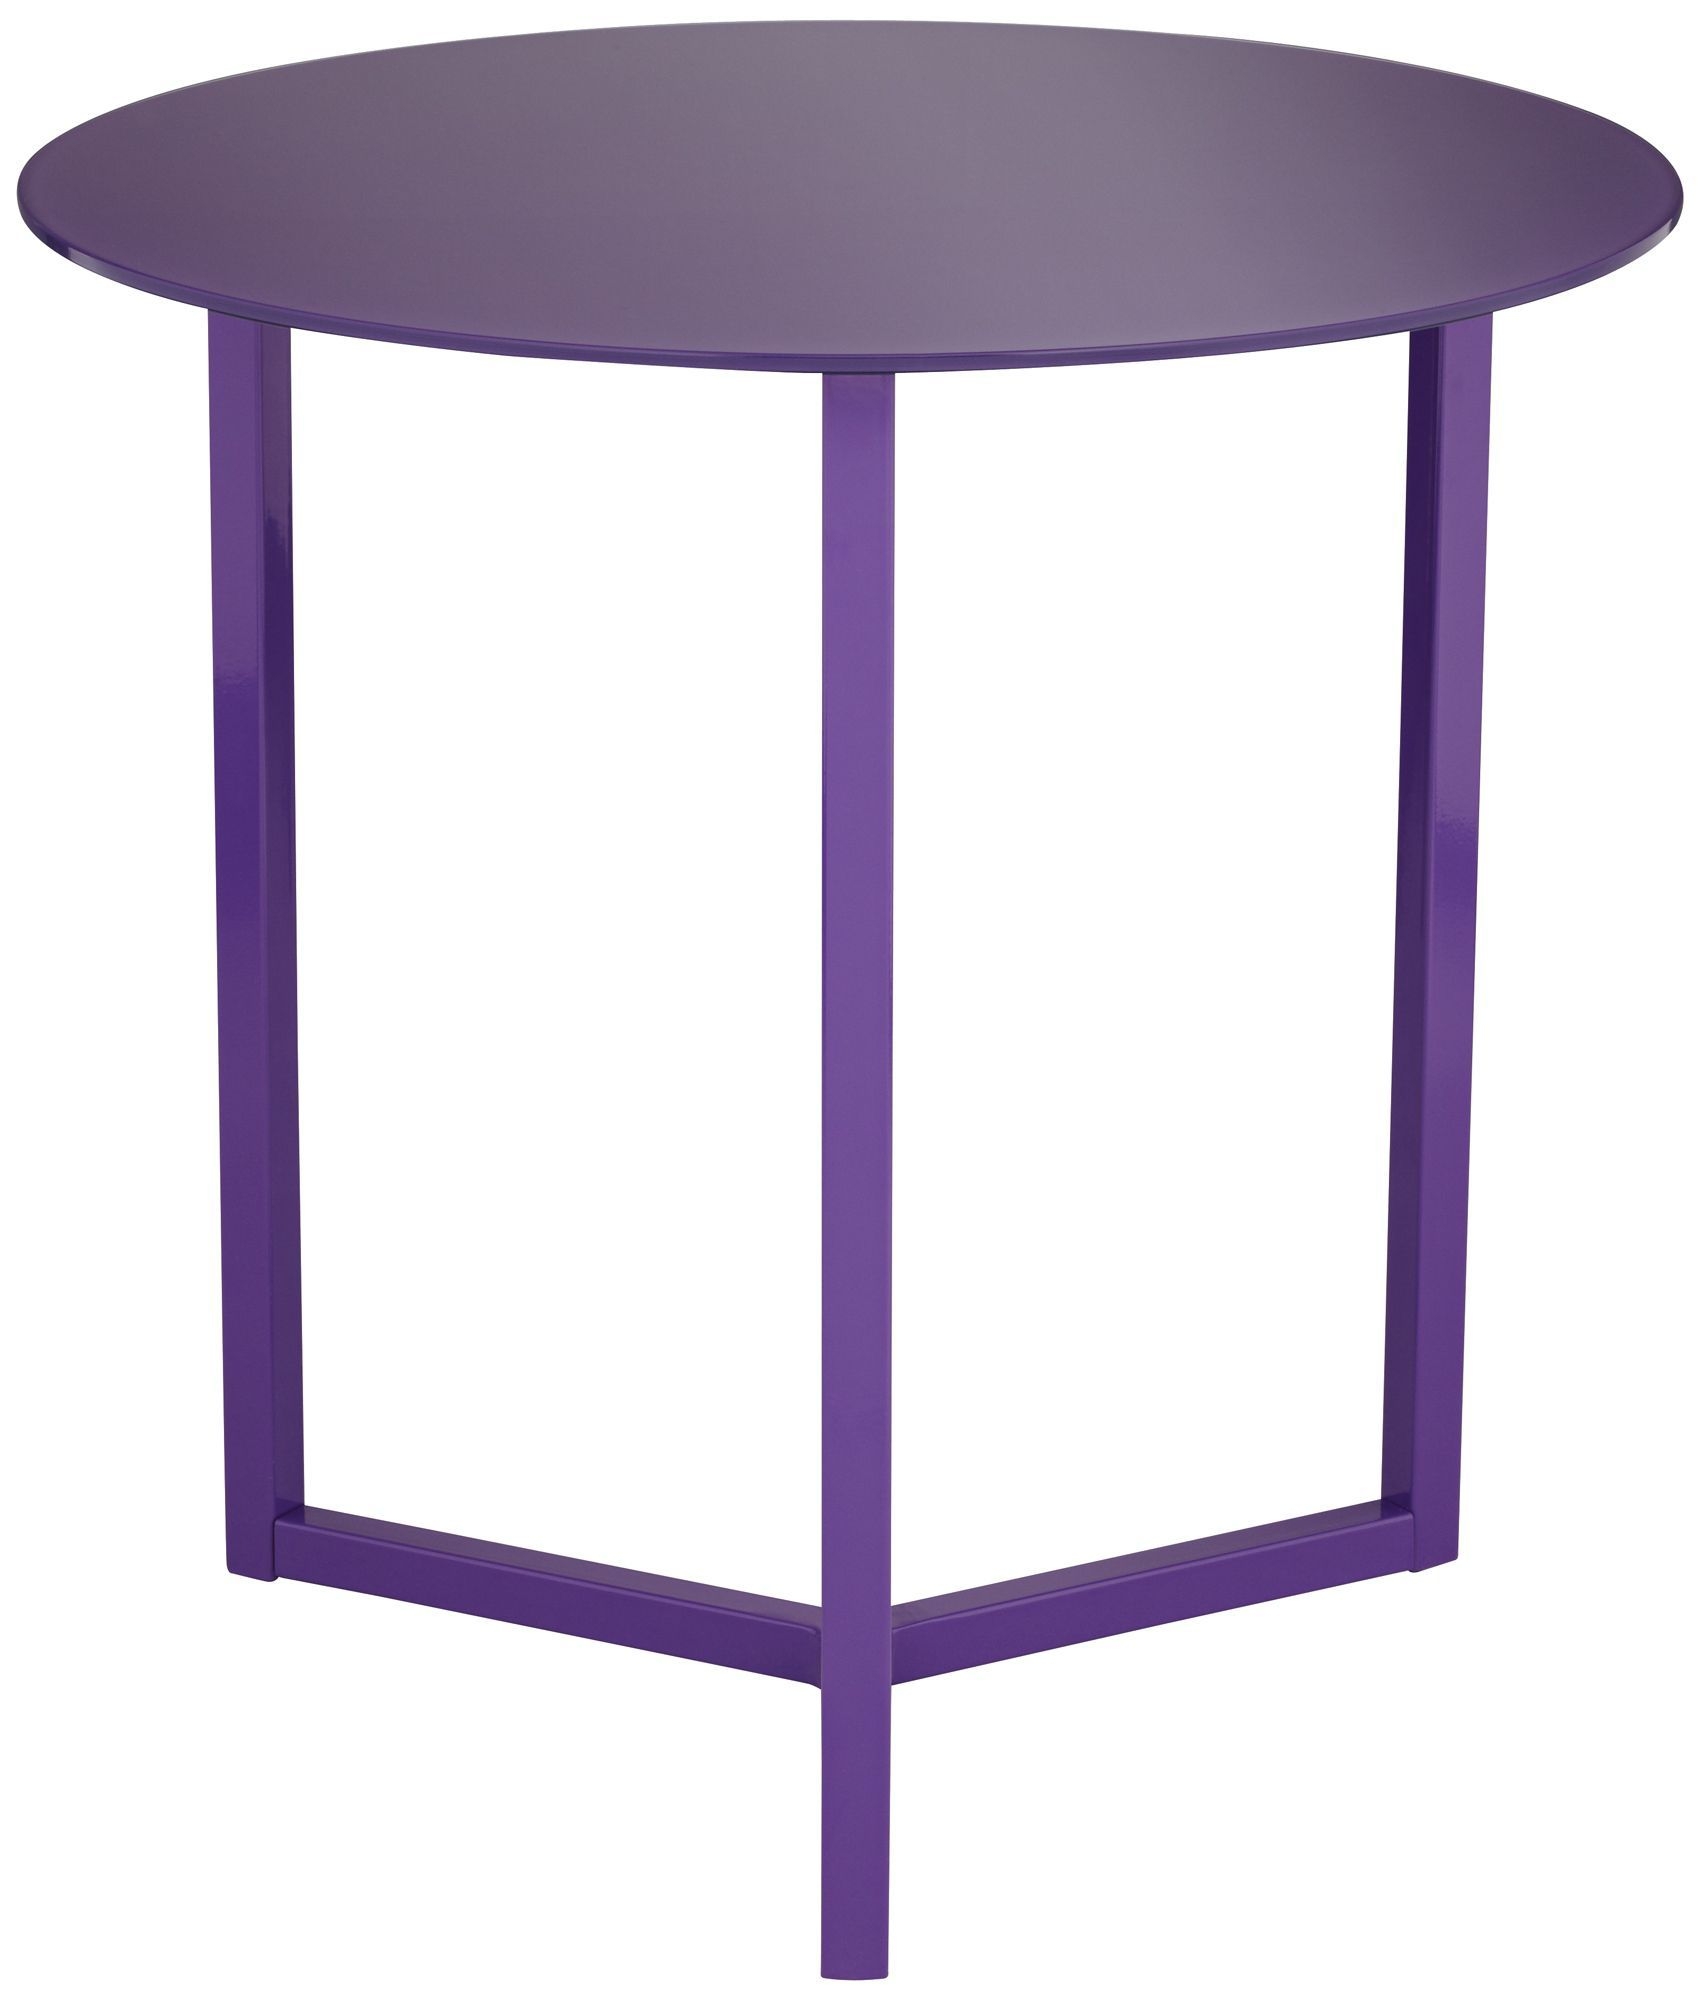 Brunetta purple accent table modern side tables and end tables